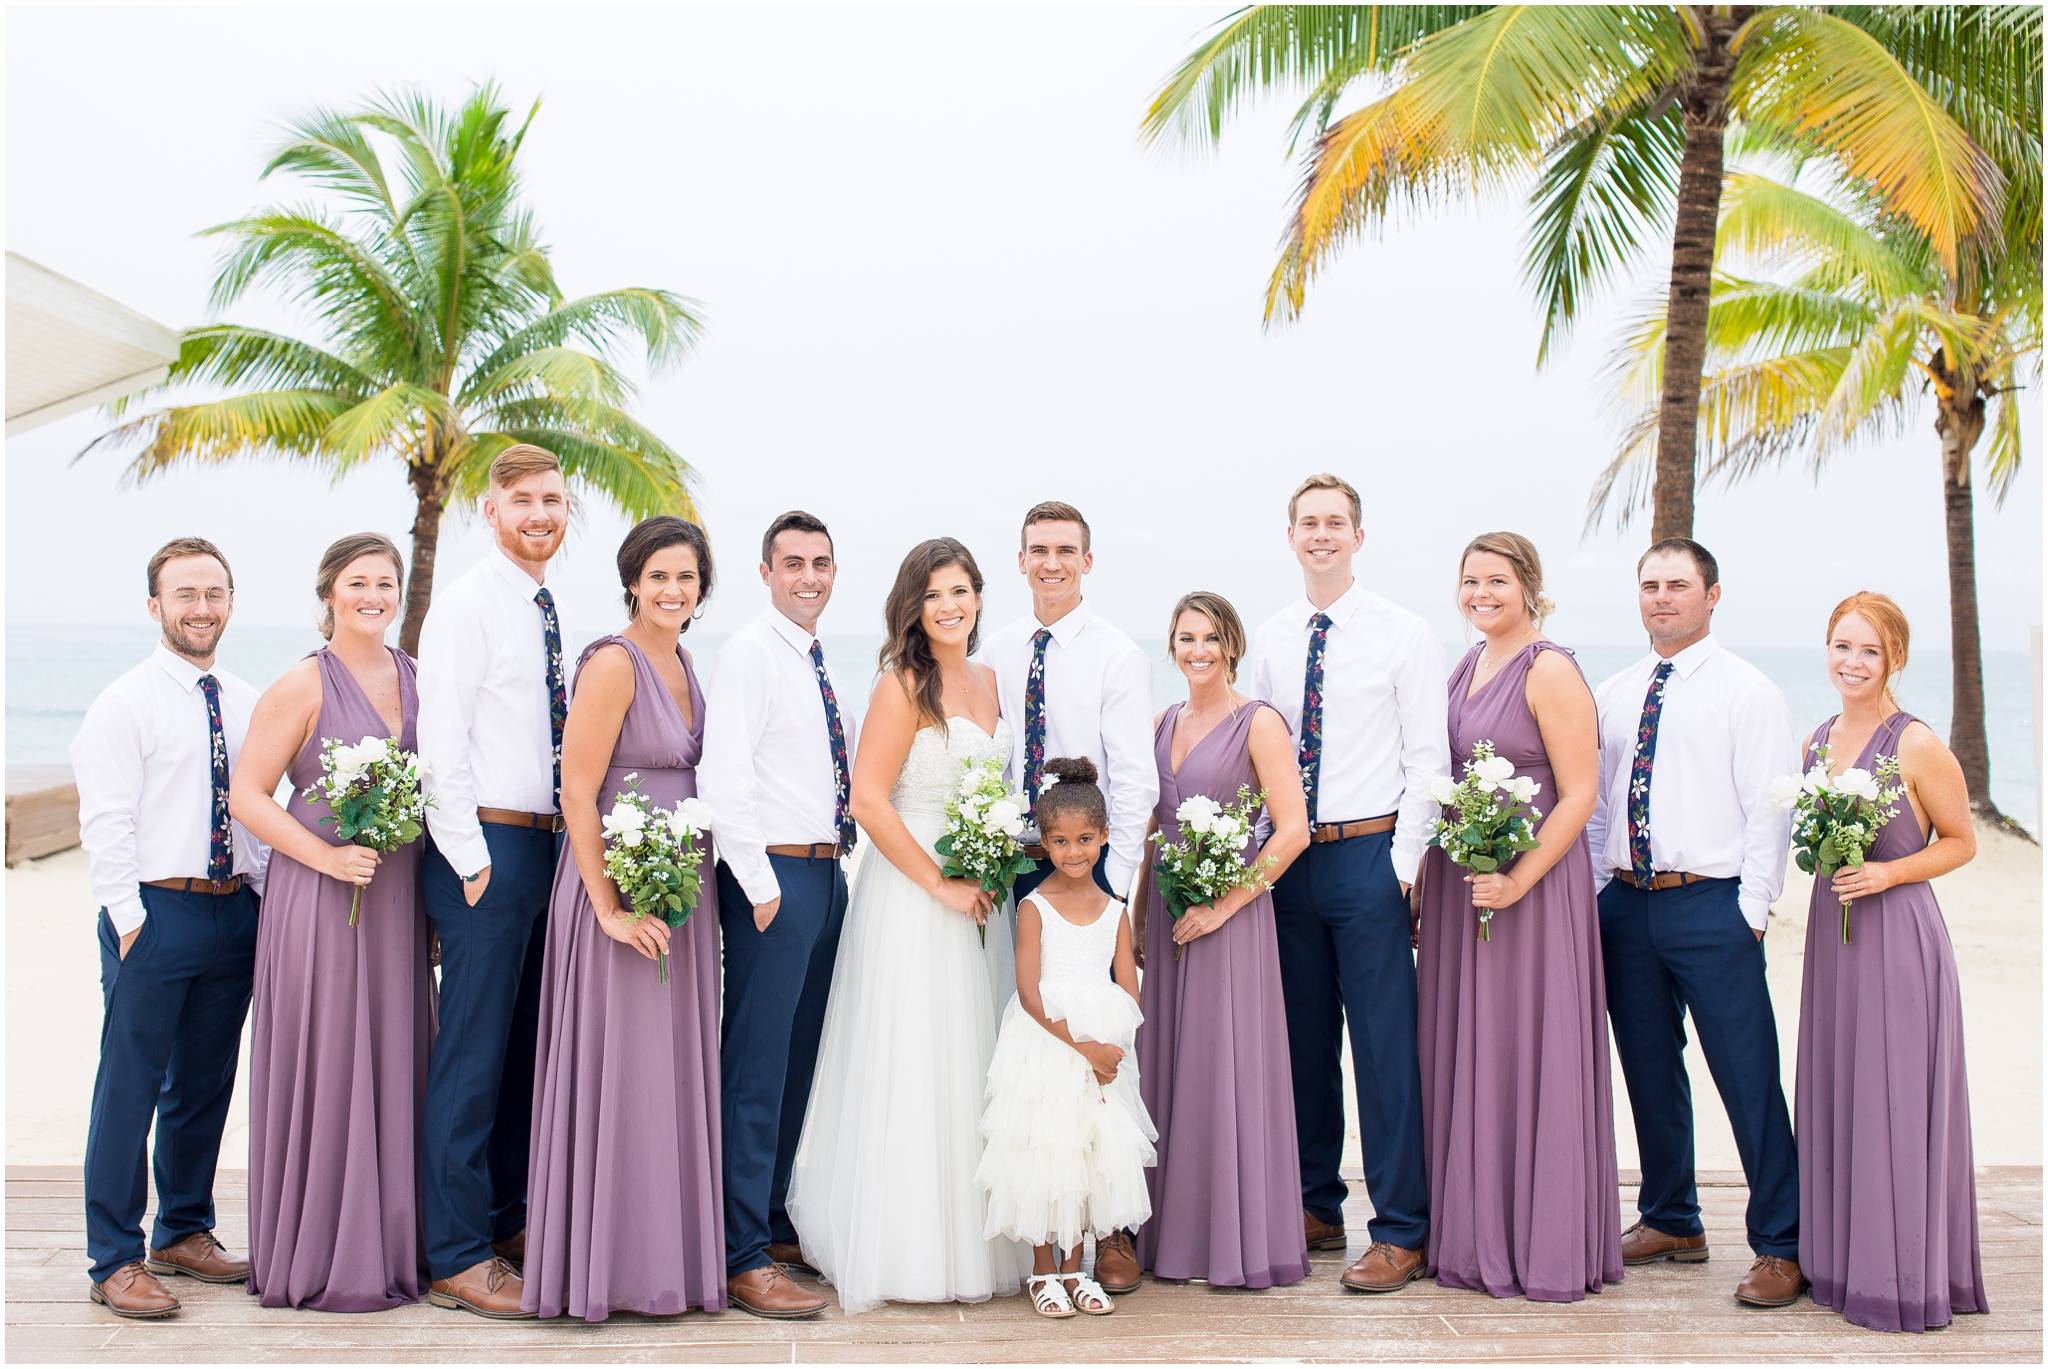 This Montego Bay wedding was a Jamaica destination wedding captured by Jamaica wedding photographer Taylor Rose Photography at one of the best Montego Bay wedding venues, the Royalton Blue Waters Montego Bay. This Royalton Blue waters wedding at the Royalton Montego Bay Jamaica included dusty purple bridesmaid dresses from Lulu’s and a beach ceremony.